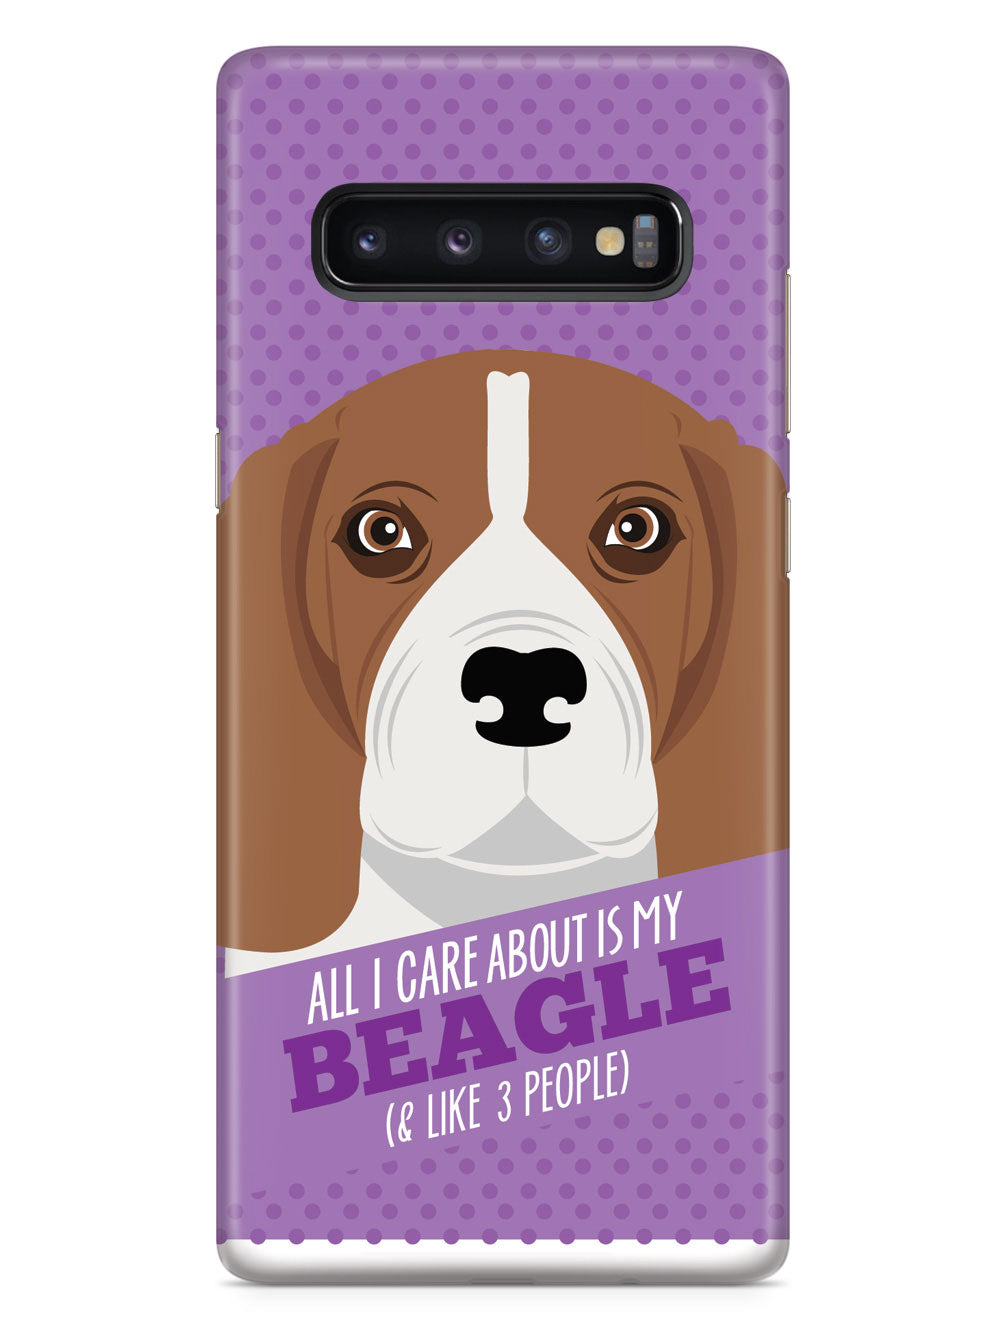 All I Care About Is My Beagle Case